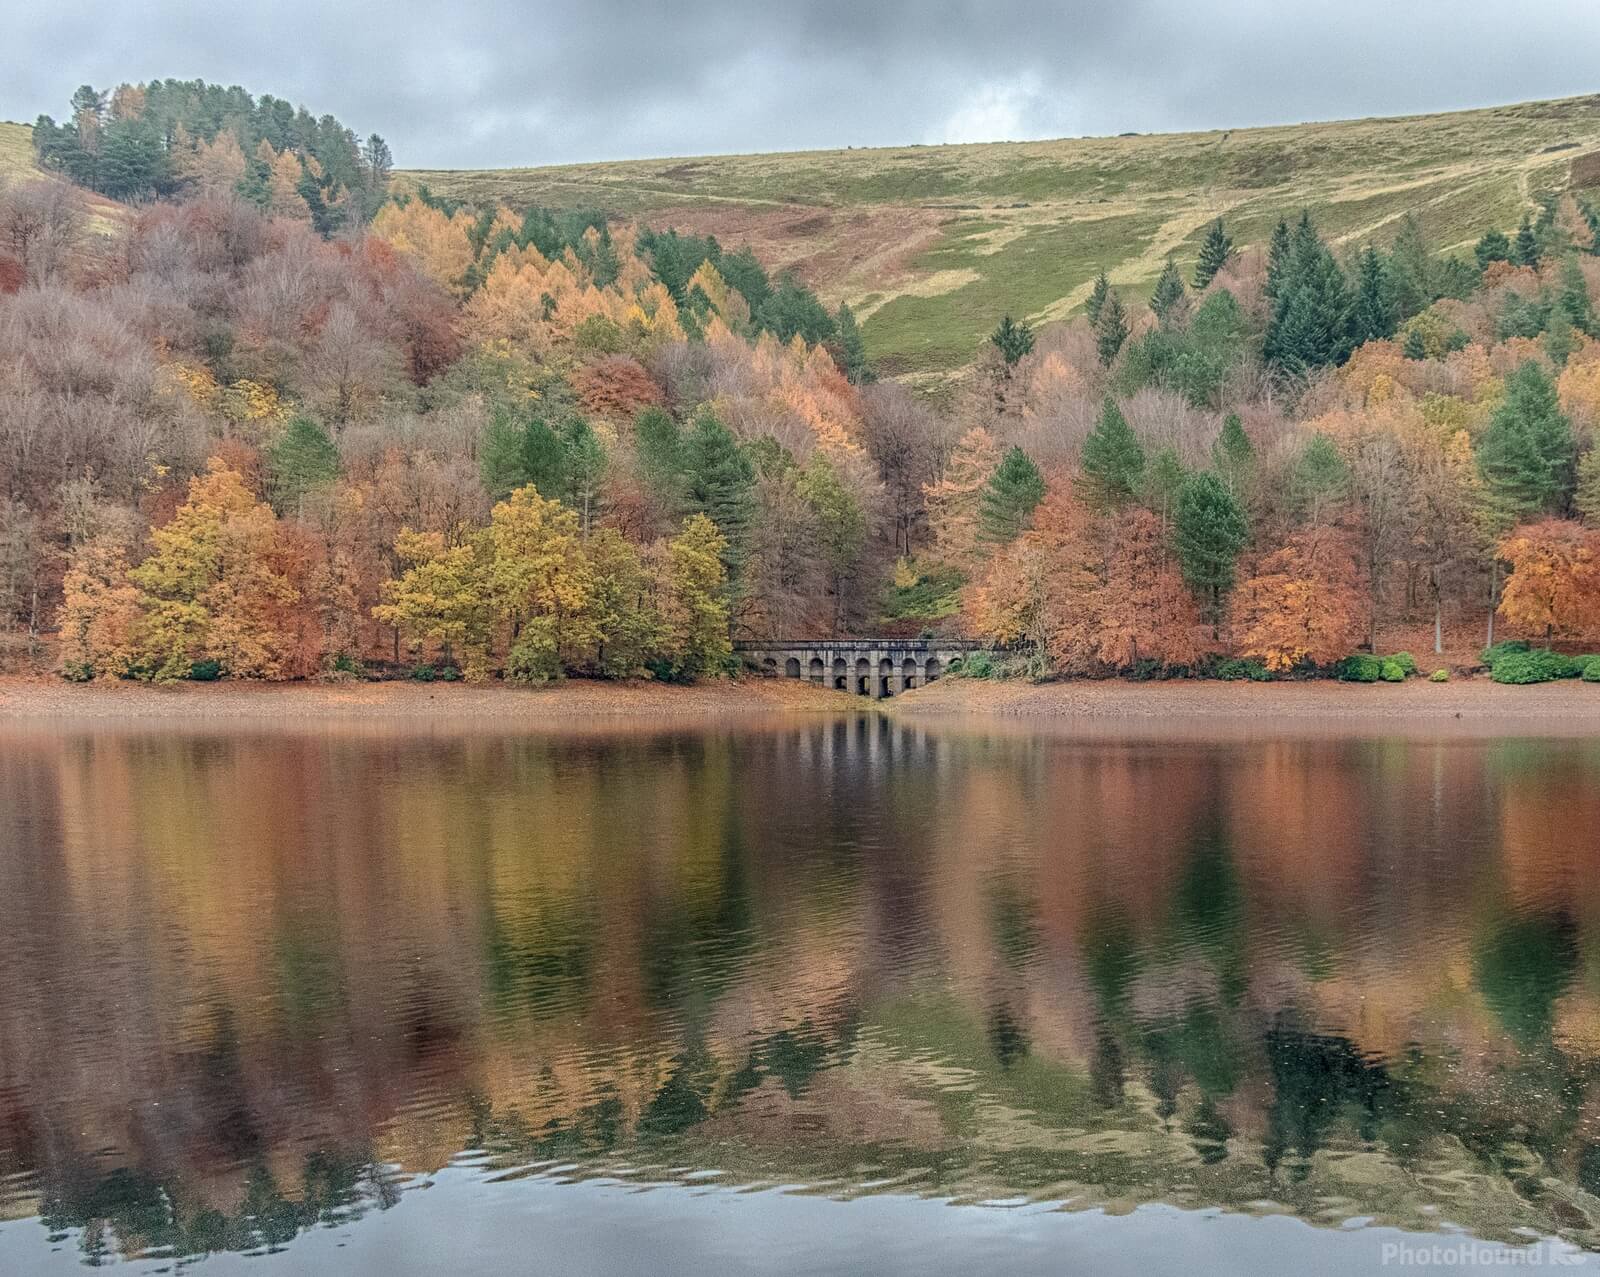 Image of Derwent Reservoir by Andy Killingbeck